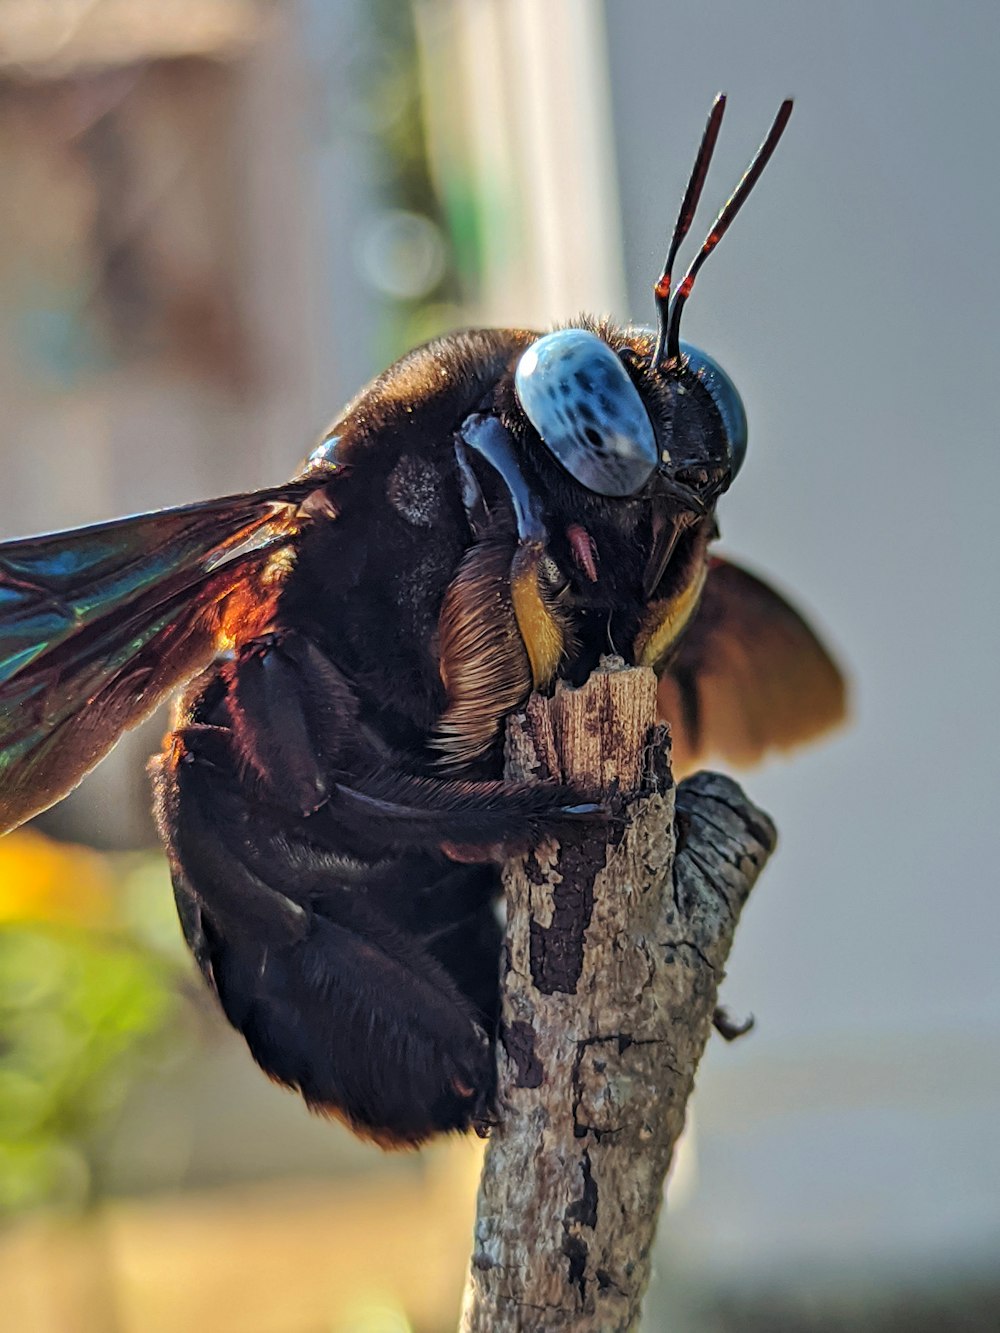 brown and black bee on brown tree branch during daytime